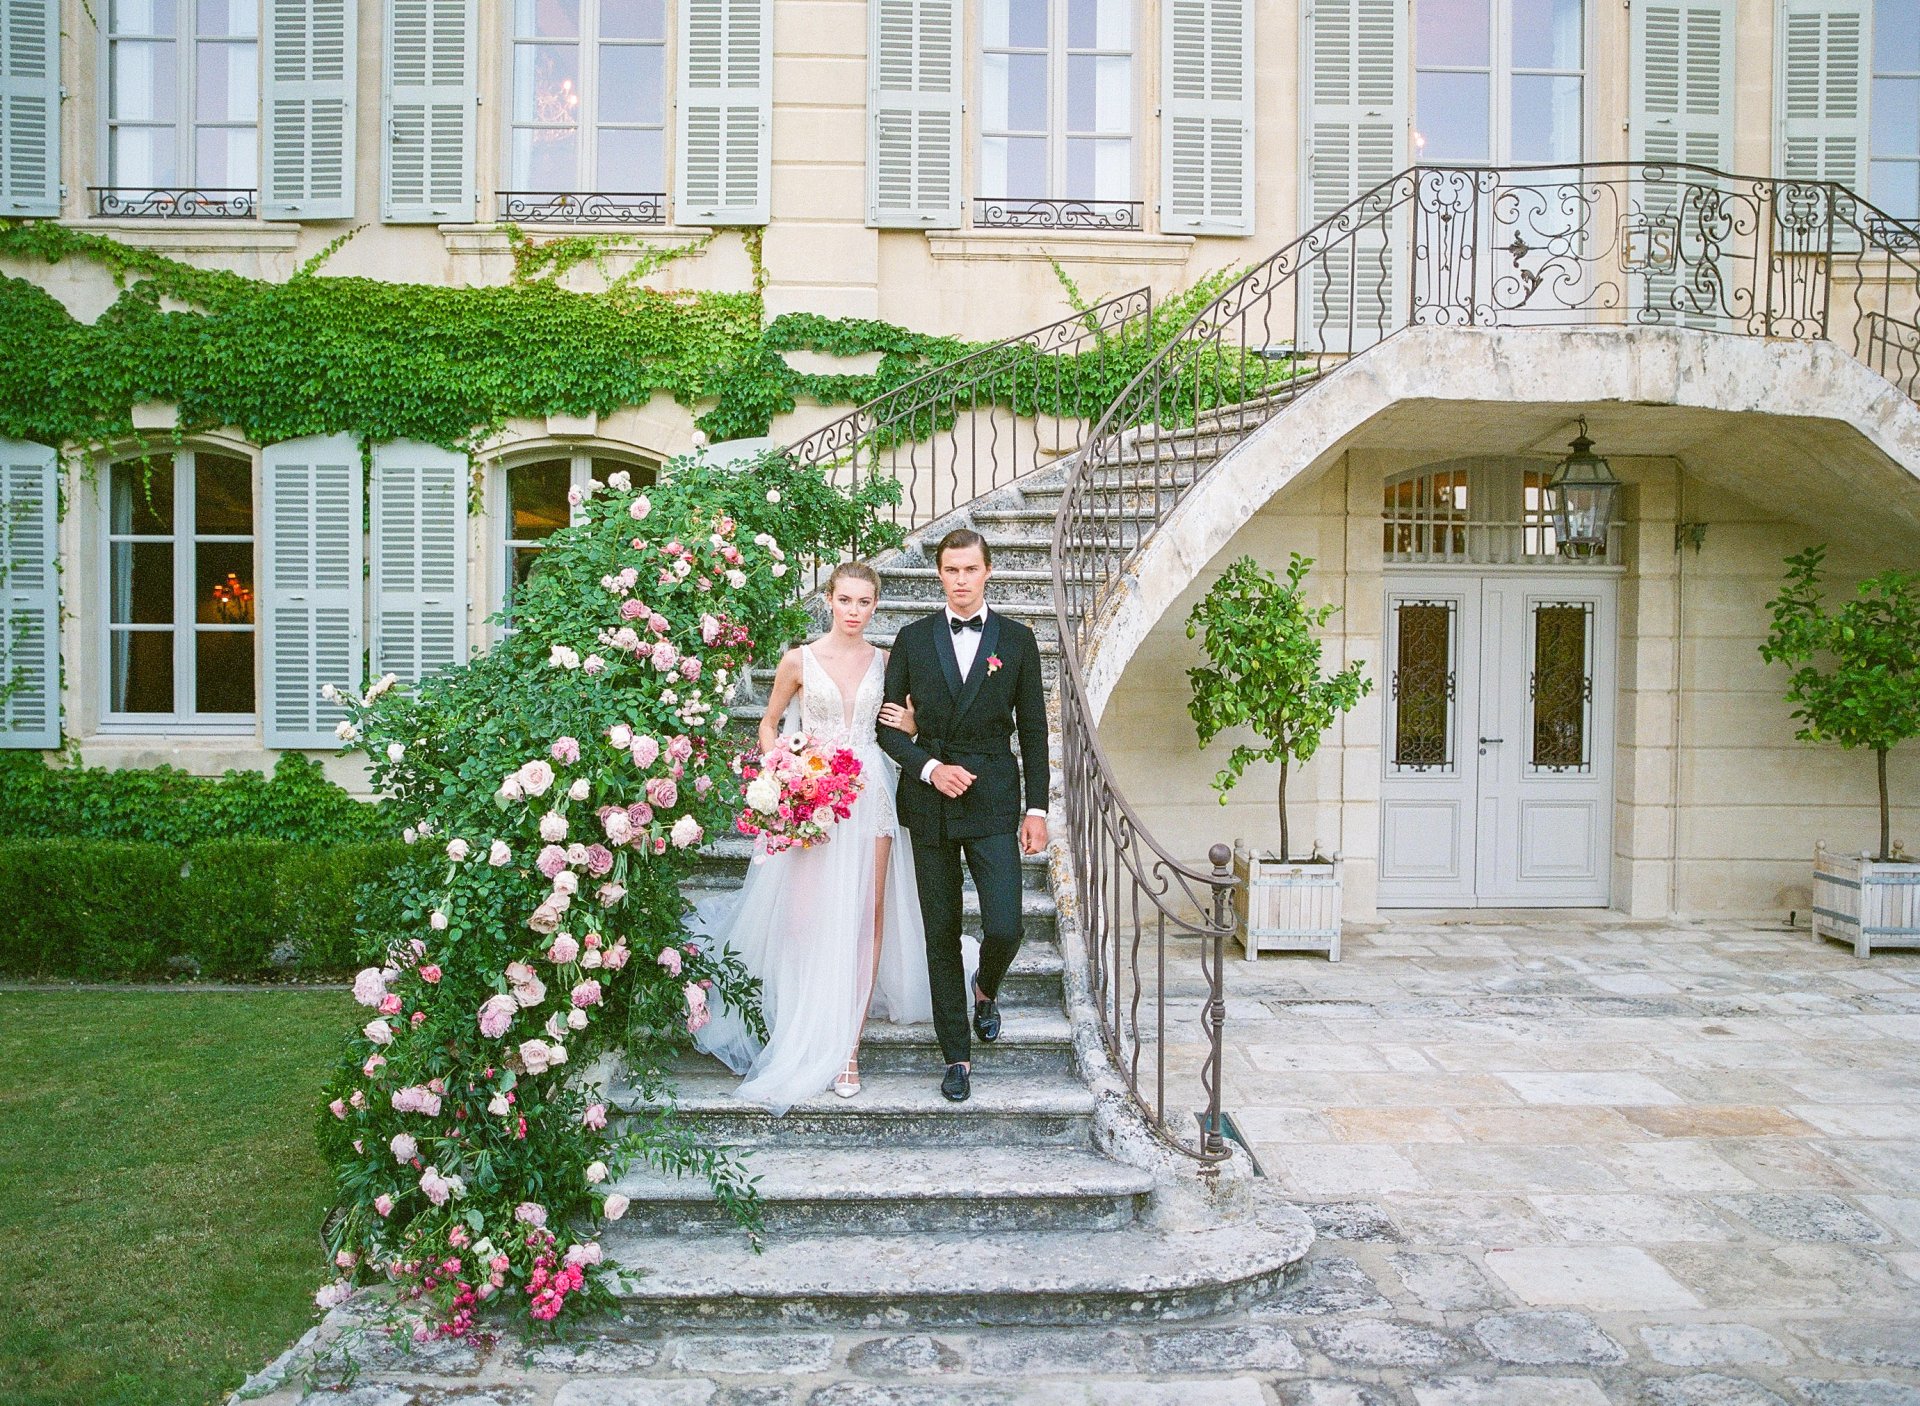 A Whimsical Wedding at a French Chateau in Provence